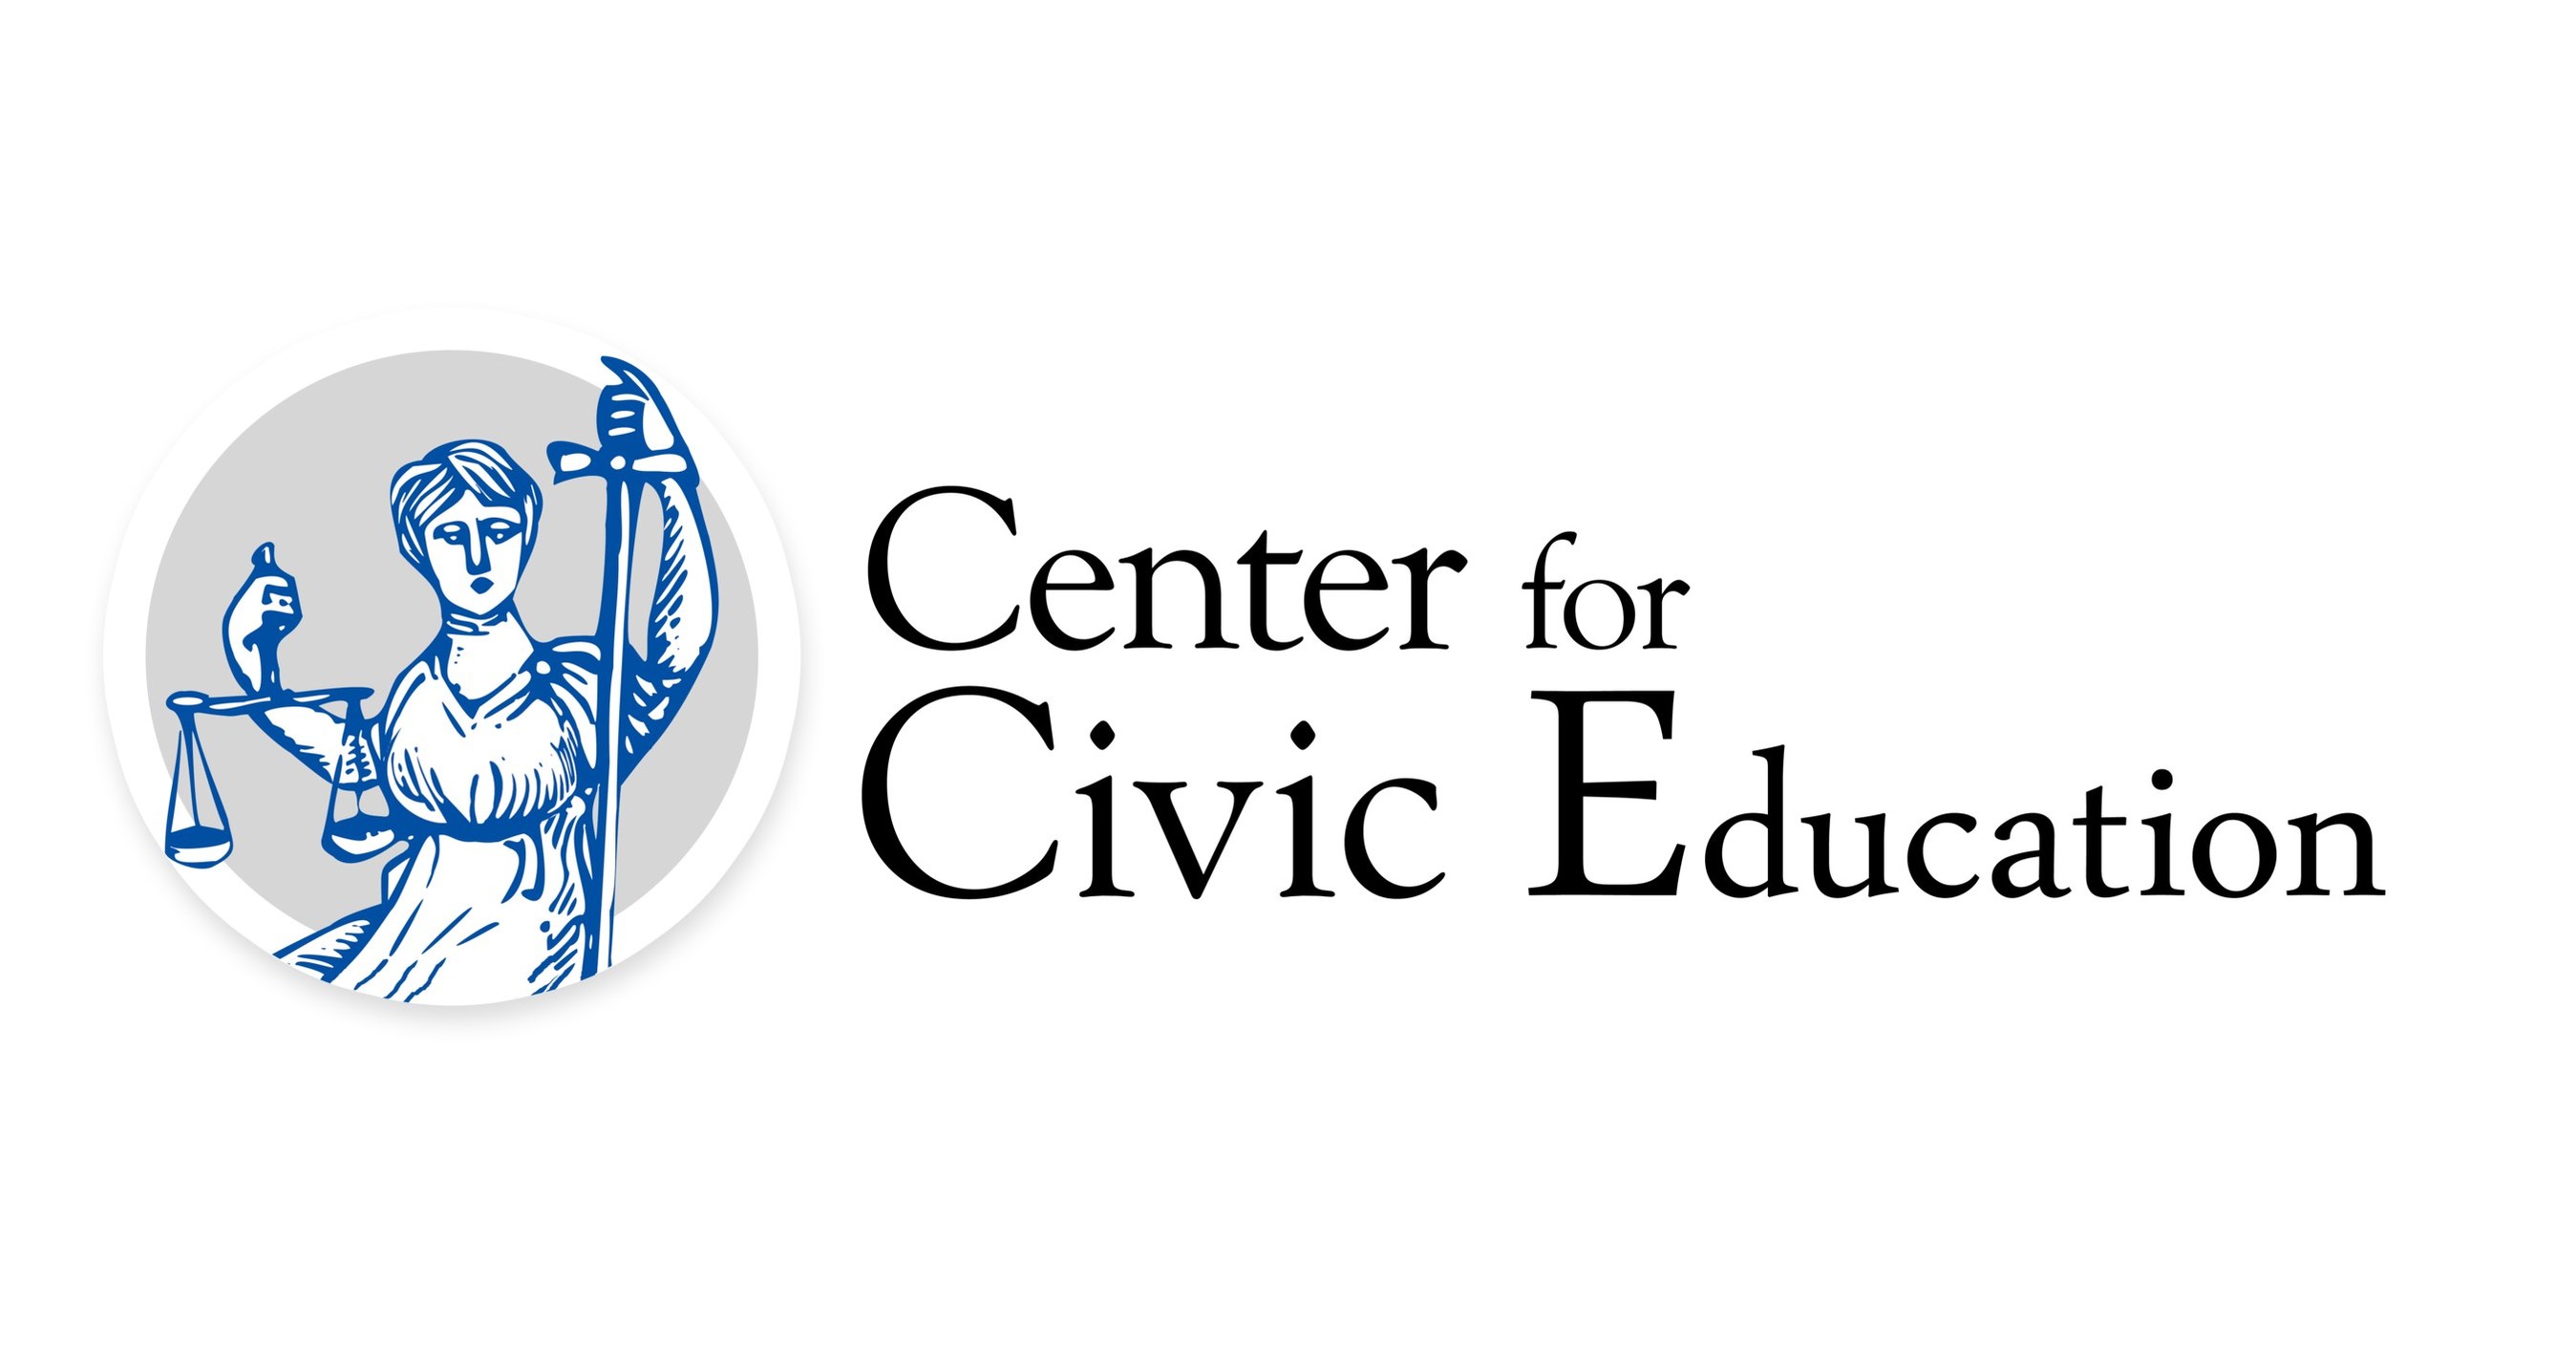 Center for Civic Instruction Launches New Countrywide Advisory Council